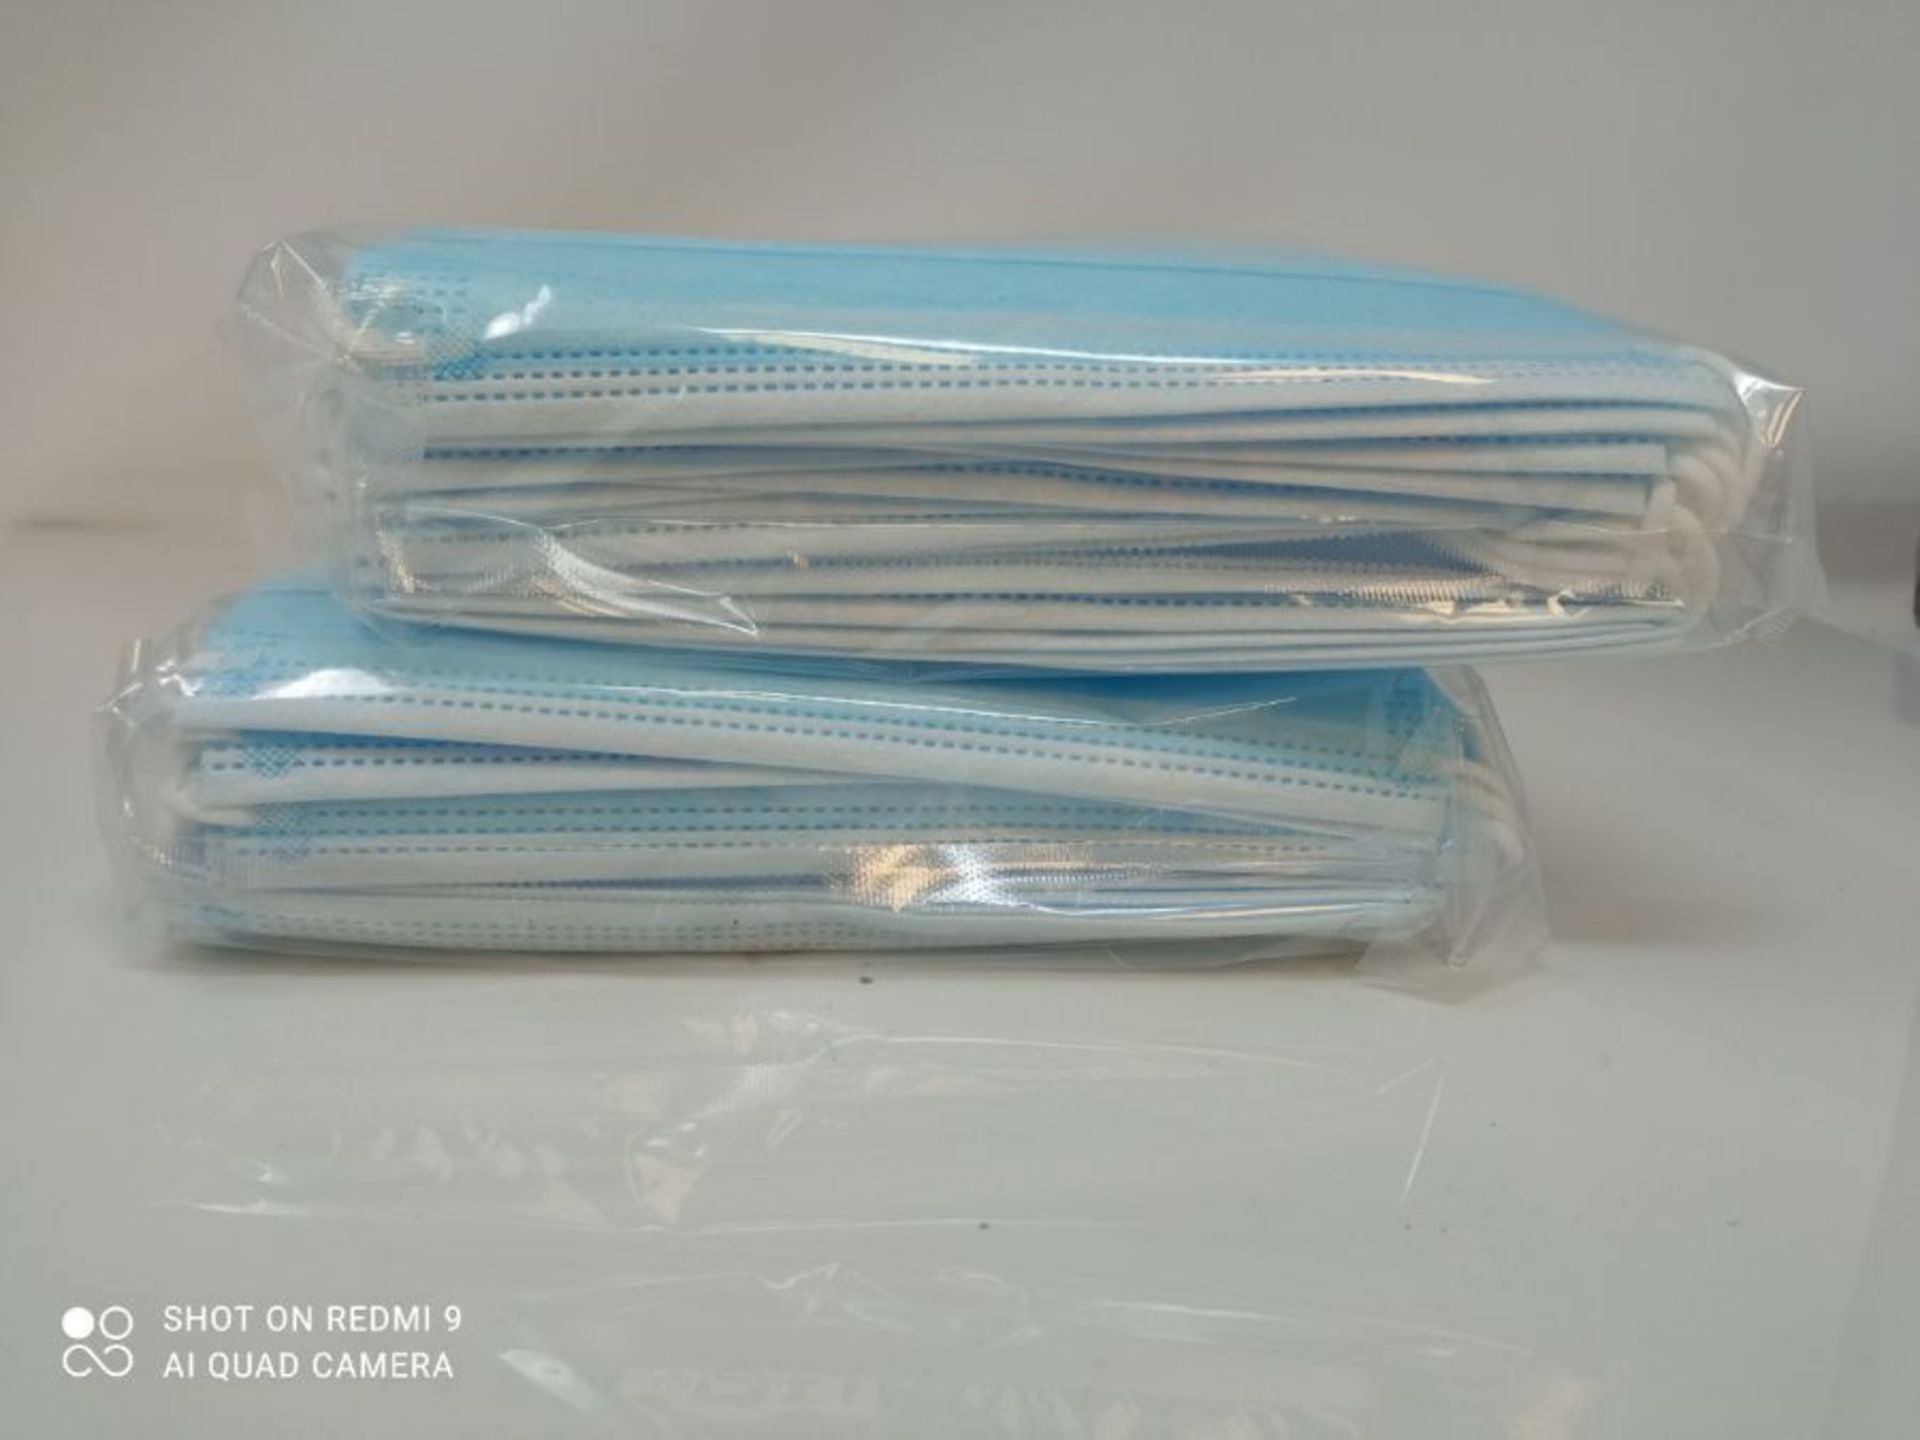 creek medical CE Approved and Tested 3-Layer Medical Surgical Mask Type I, Non-Sterile - Image 2 of 3